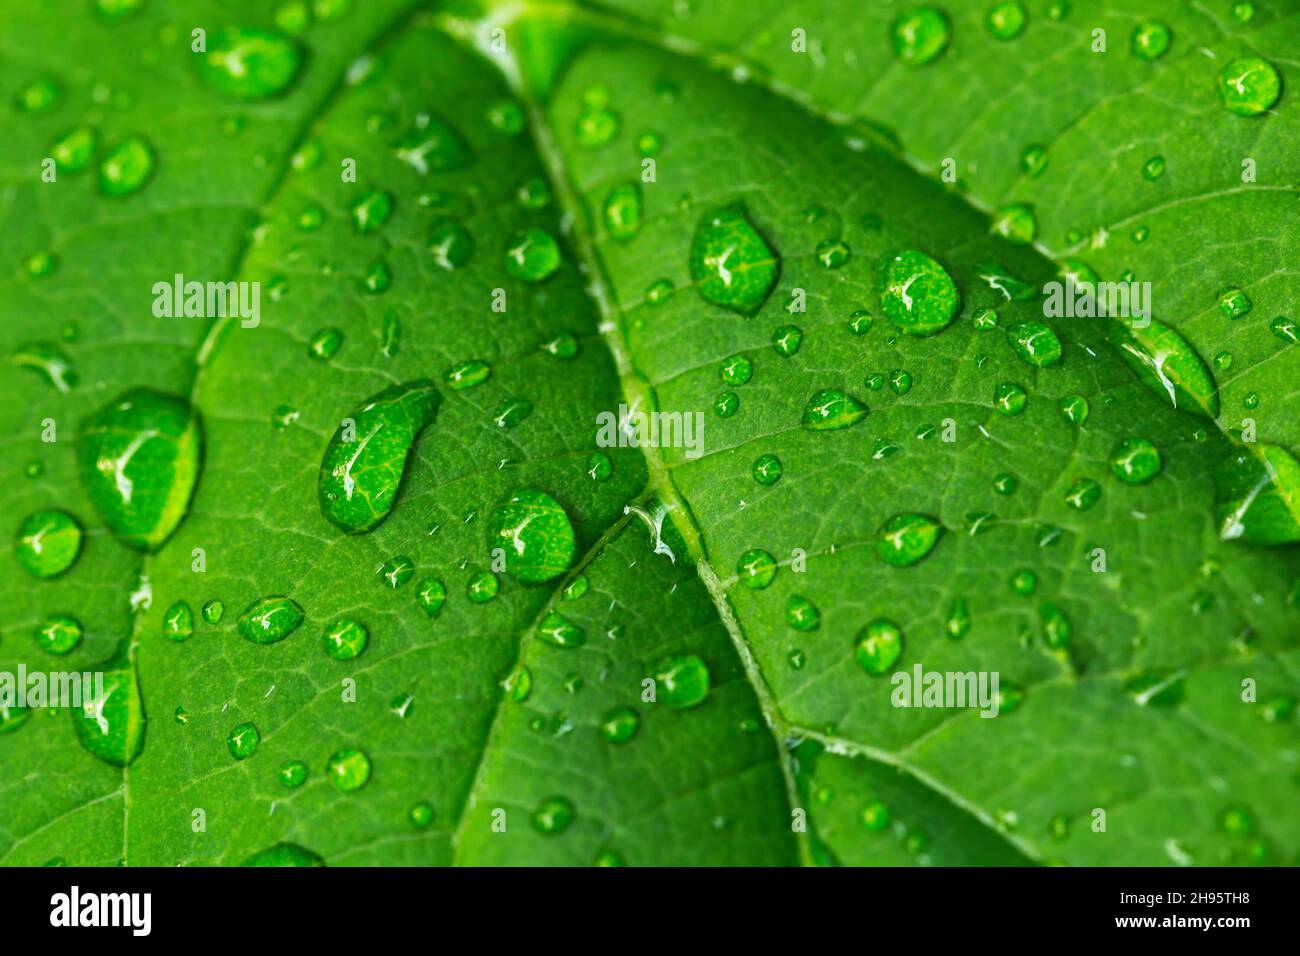 Macrophotography of drops of rain on a green leaf Stock Photo